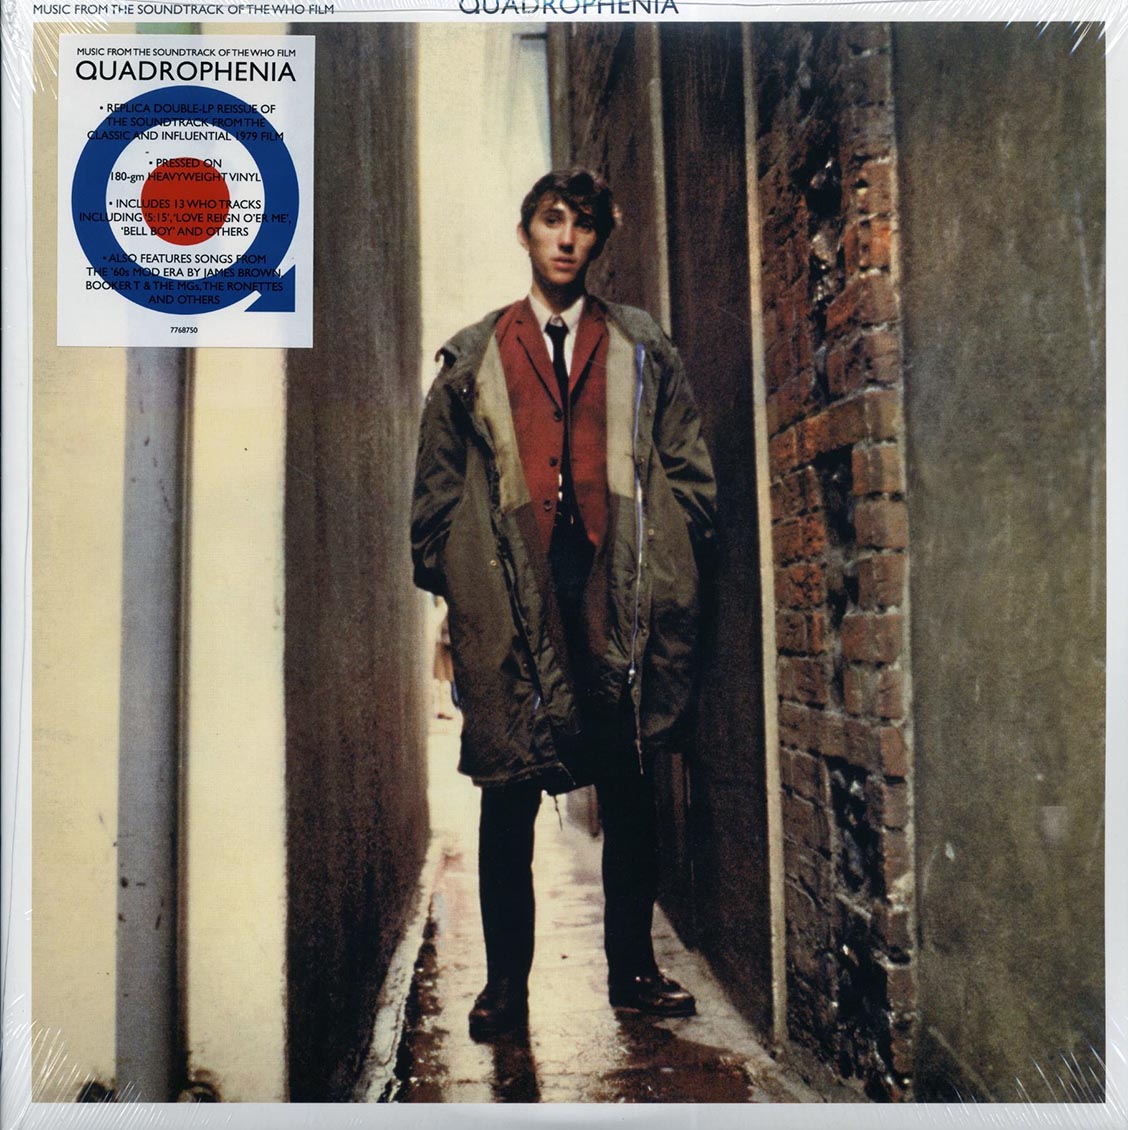 The Who, The Chiffons, The Crystals, Etc. - Quadrophenia: Music From The Soundtrack Of The Who Film (RSD 2017) (2xLP) (180g) - Vinyl LP